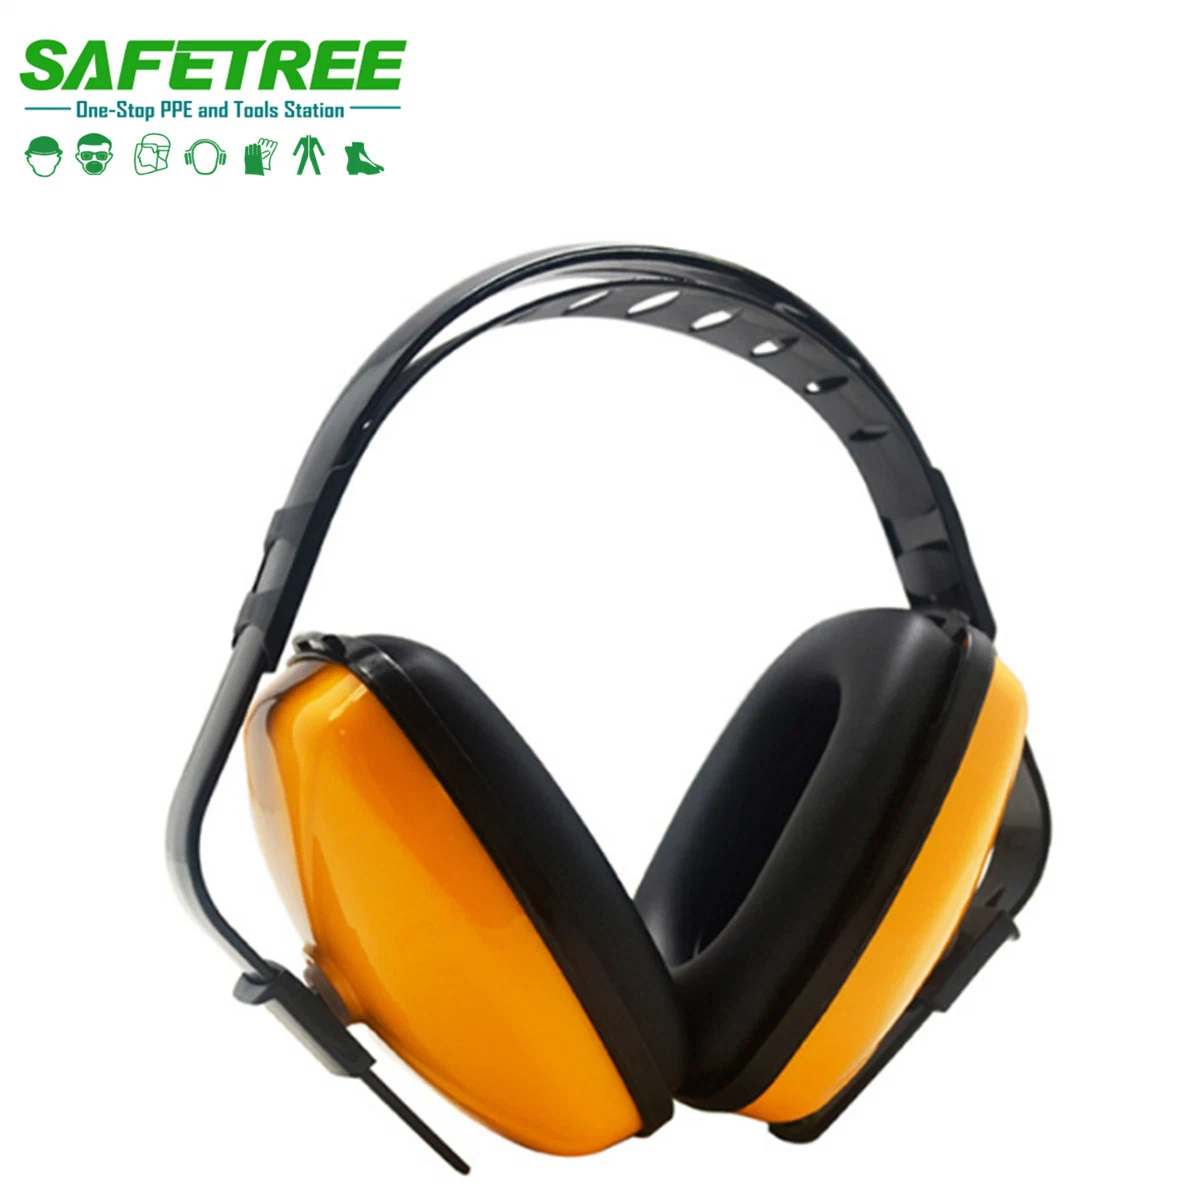 Safetree ABS Shell & PVC Covered Cushion Protective Safety Ear Muff PPE Safety Hearing Protection